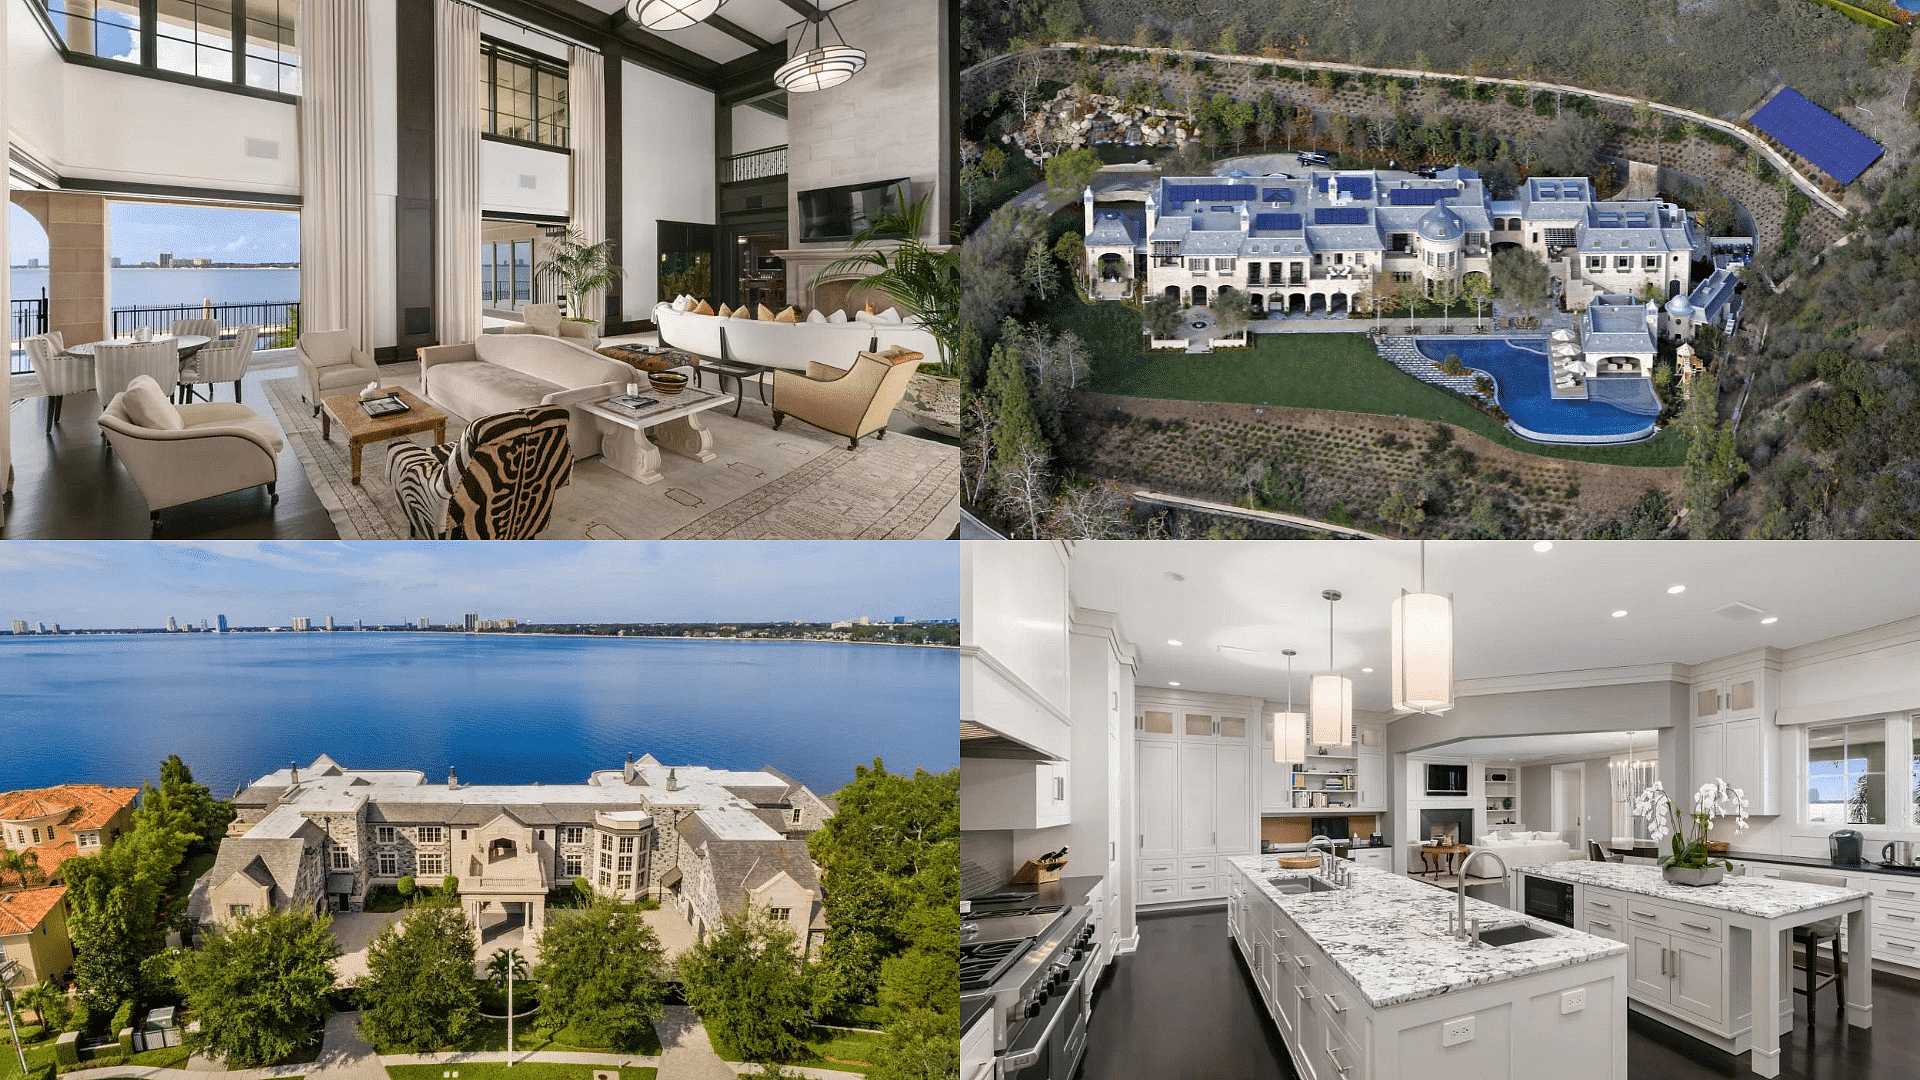 Houses owned by Tom Brady